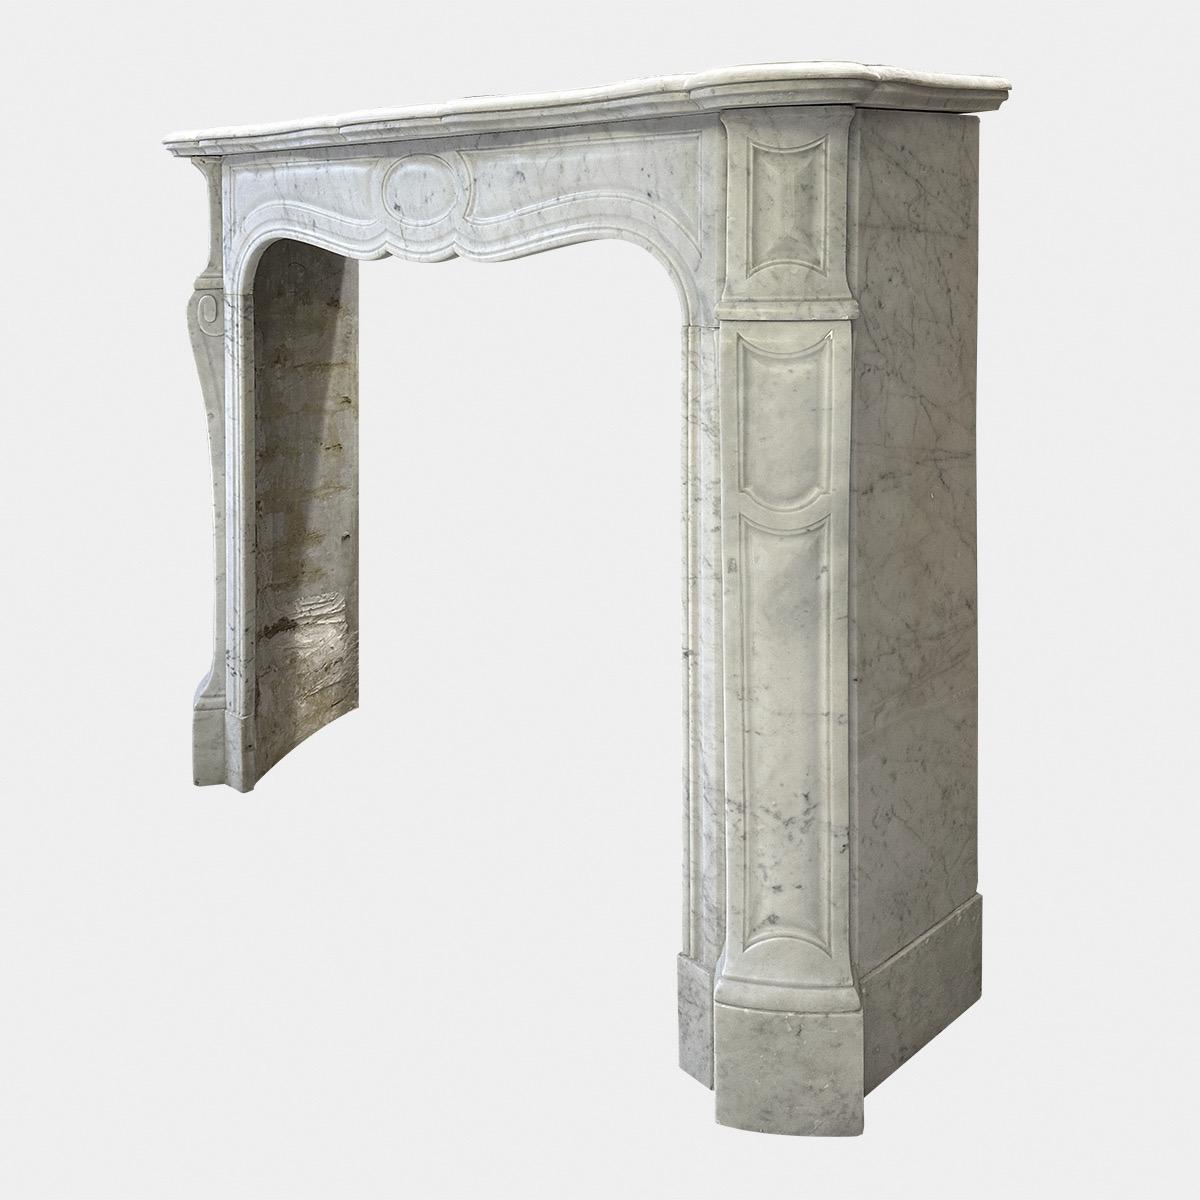 An antique late 19th c Carrara marble Louis XV Pompadour style fireplace. The serpentine shelf with mouldings underneath above a conforming serpentine frieze with oval panel to centre. Console cantered jambs with paneled corner blocks. Stood on